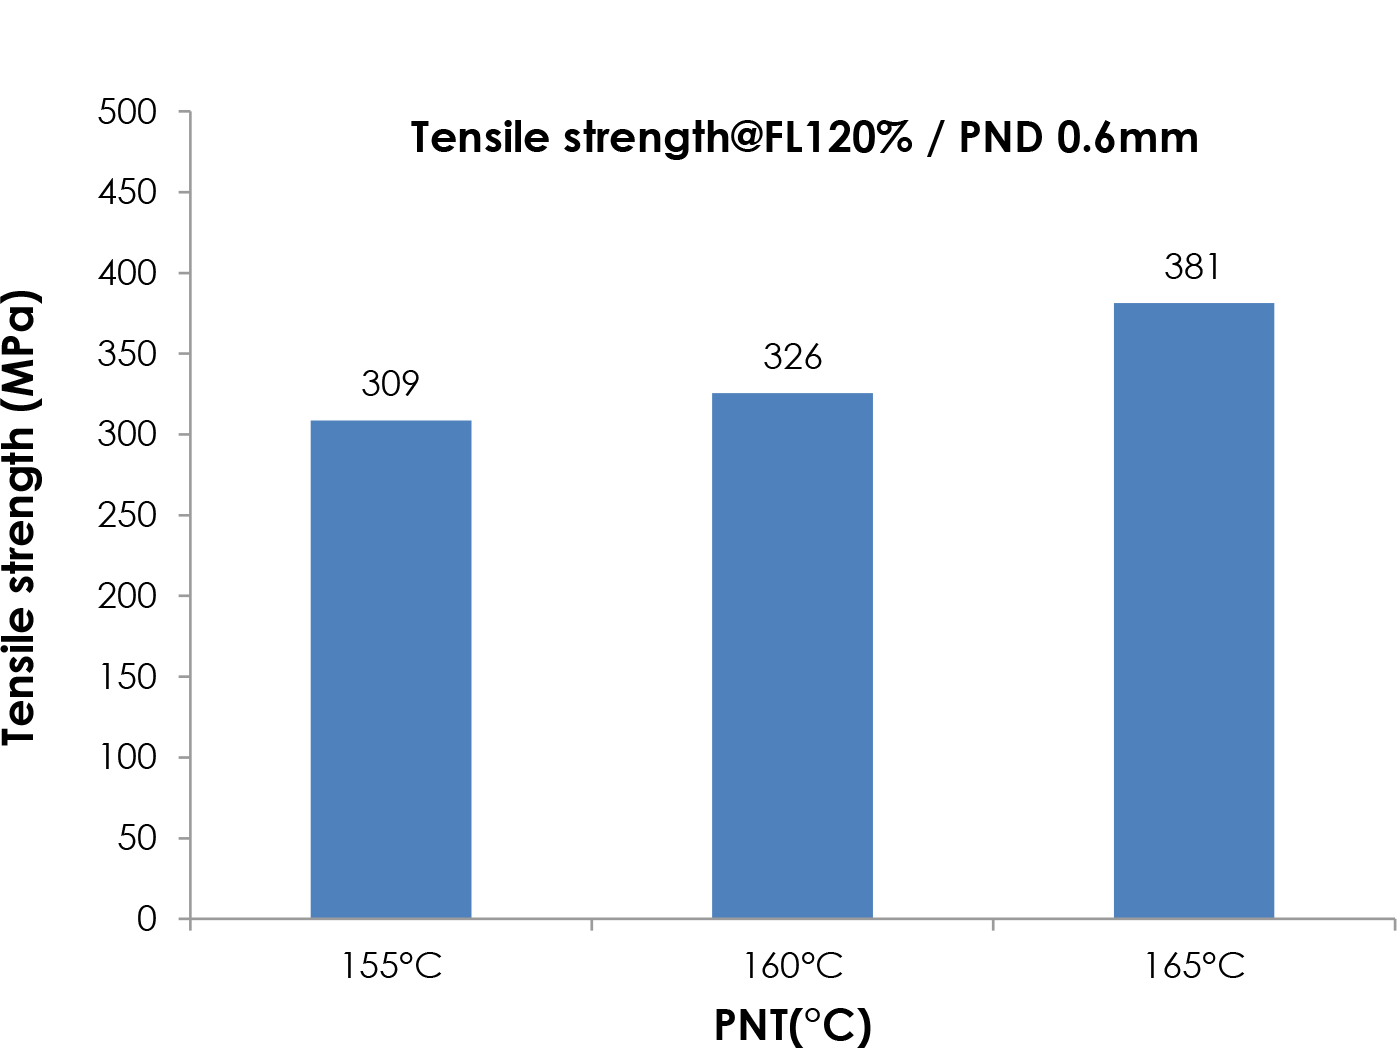 Fig. 3 The effect of nozzle temperature on tensile strength at flow rate of 120% for print nozzle of 0.6 mm